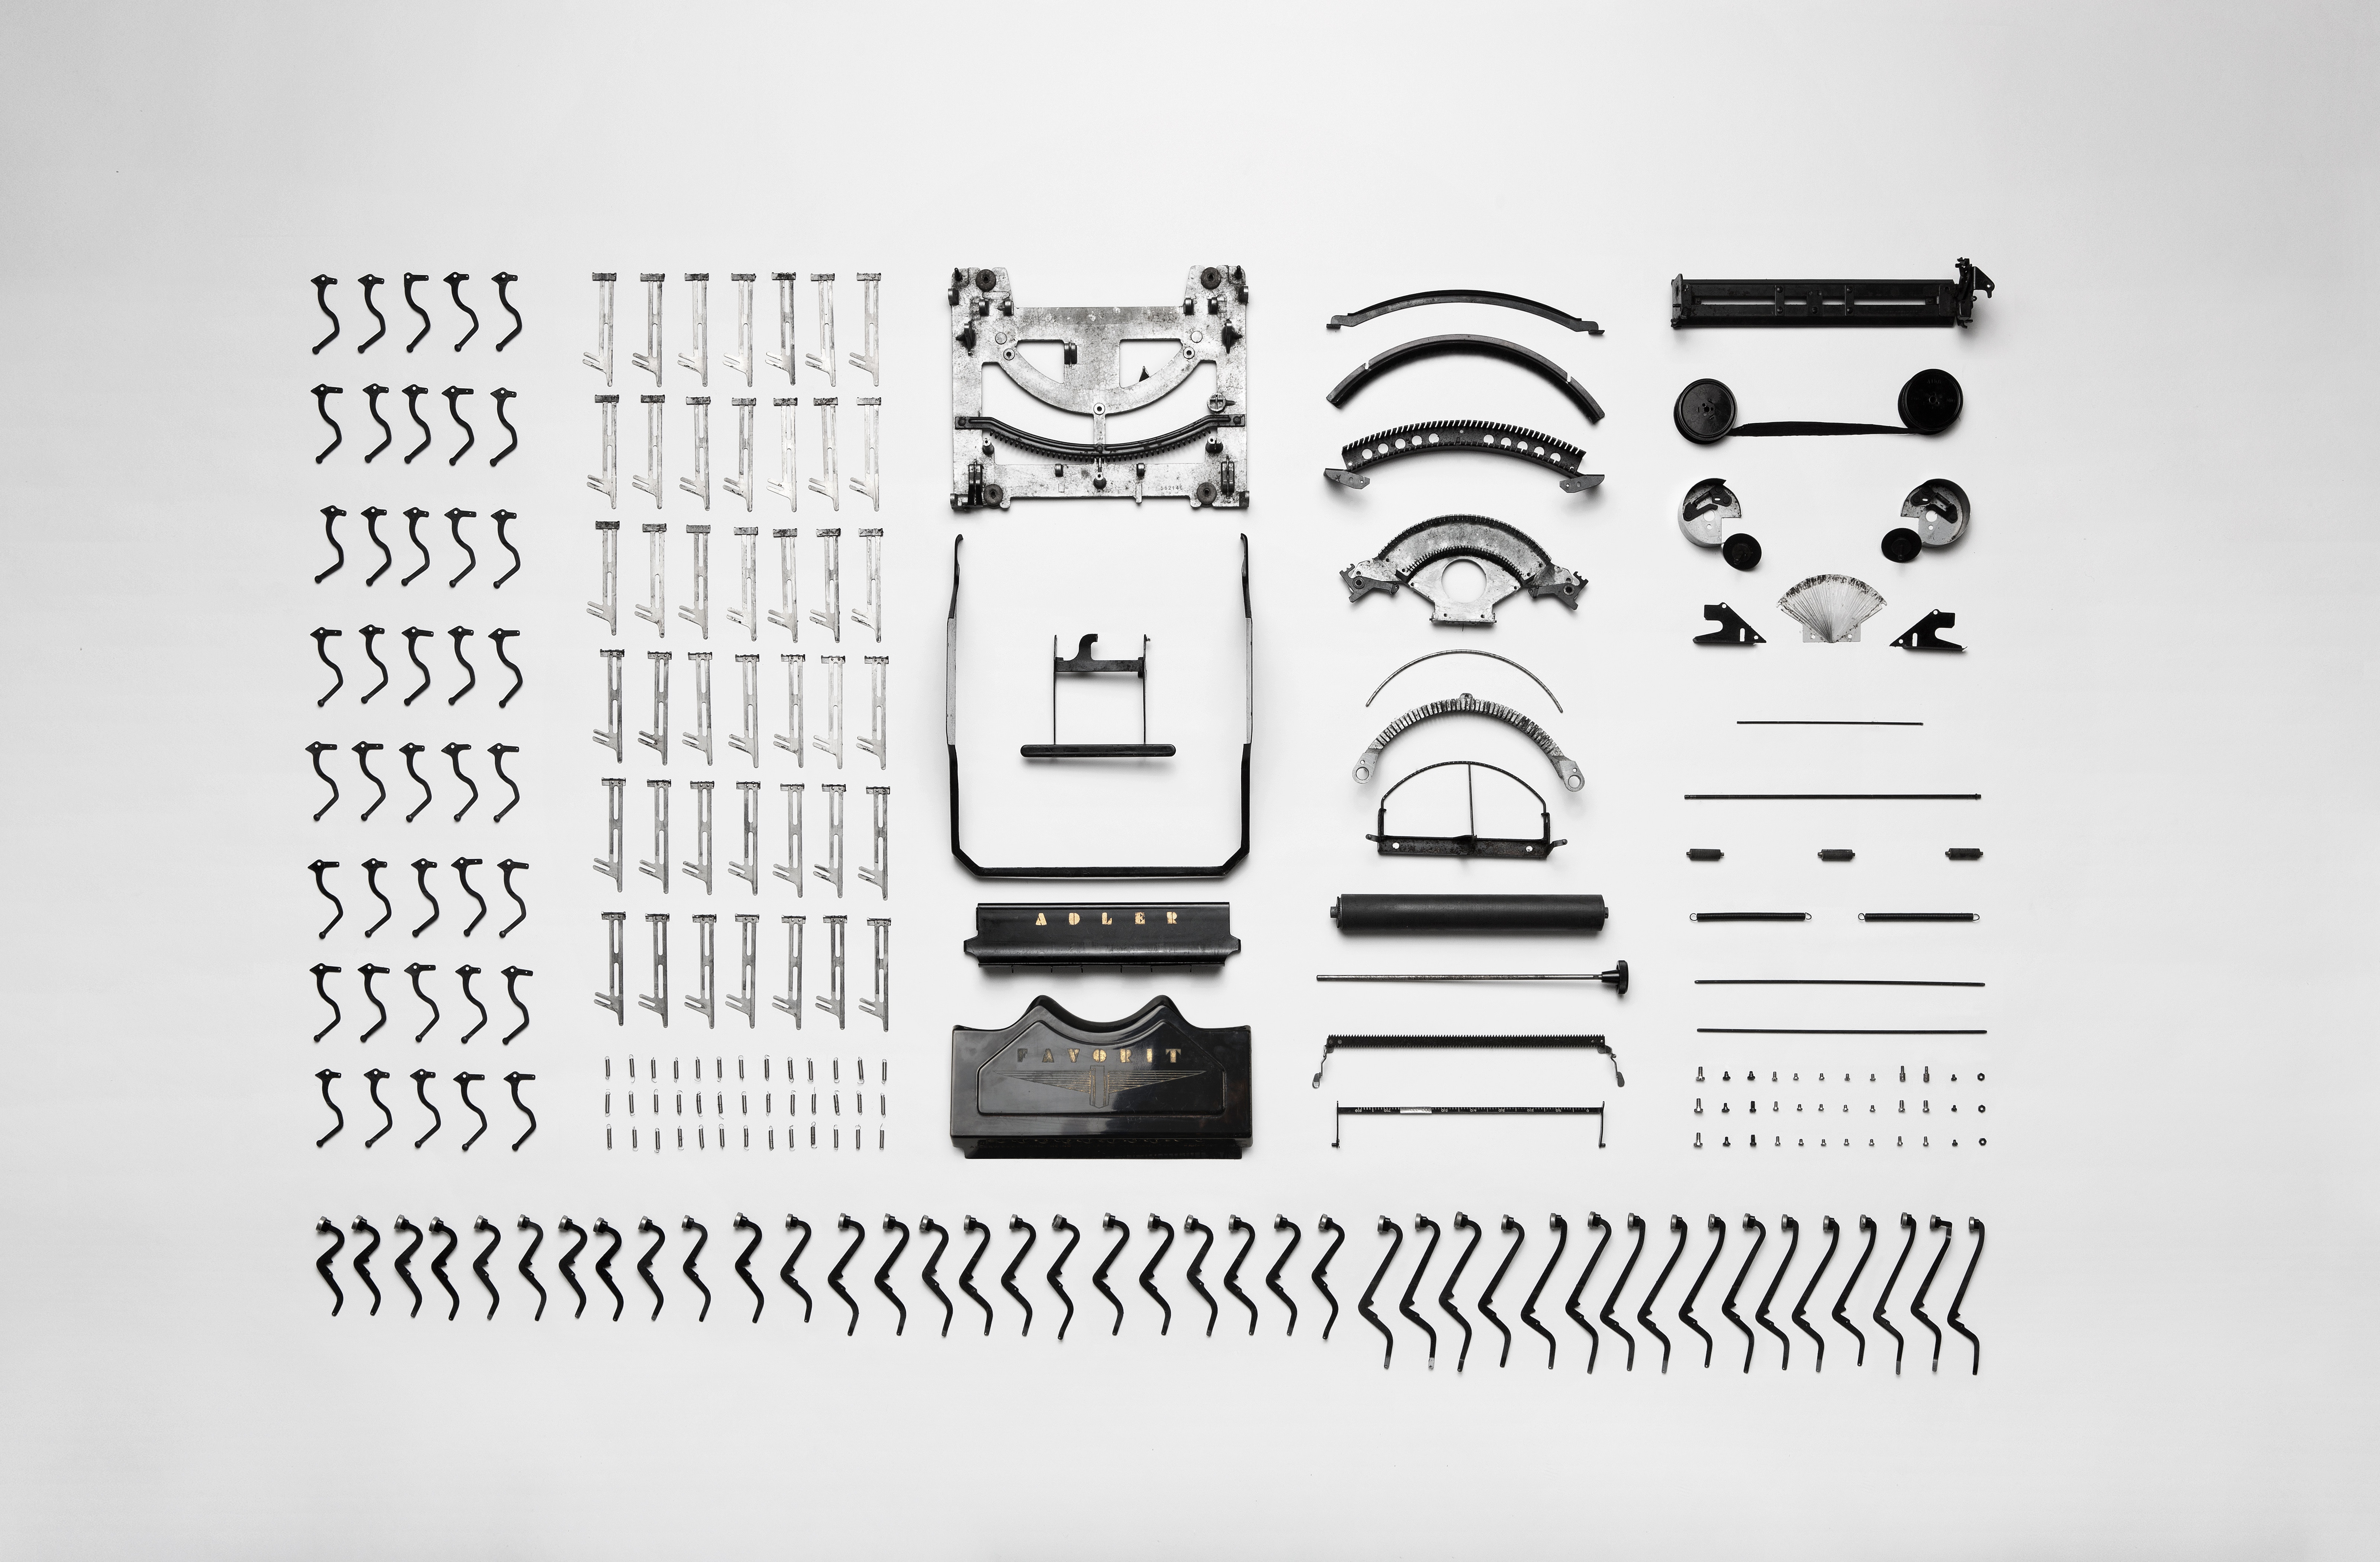 6400x4200 piece, minimalist, vintage, type, strip down, assemble, typewriter, broken, create, wallpaper, dismantle, old, tool, part, dismantled, deconstruct, technology, mechanical, disassemble, typography, Free image Gallery HD Wallpaper